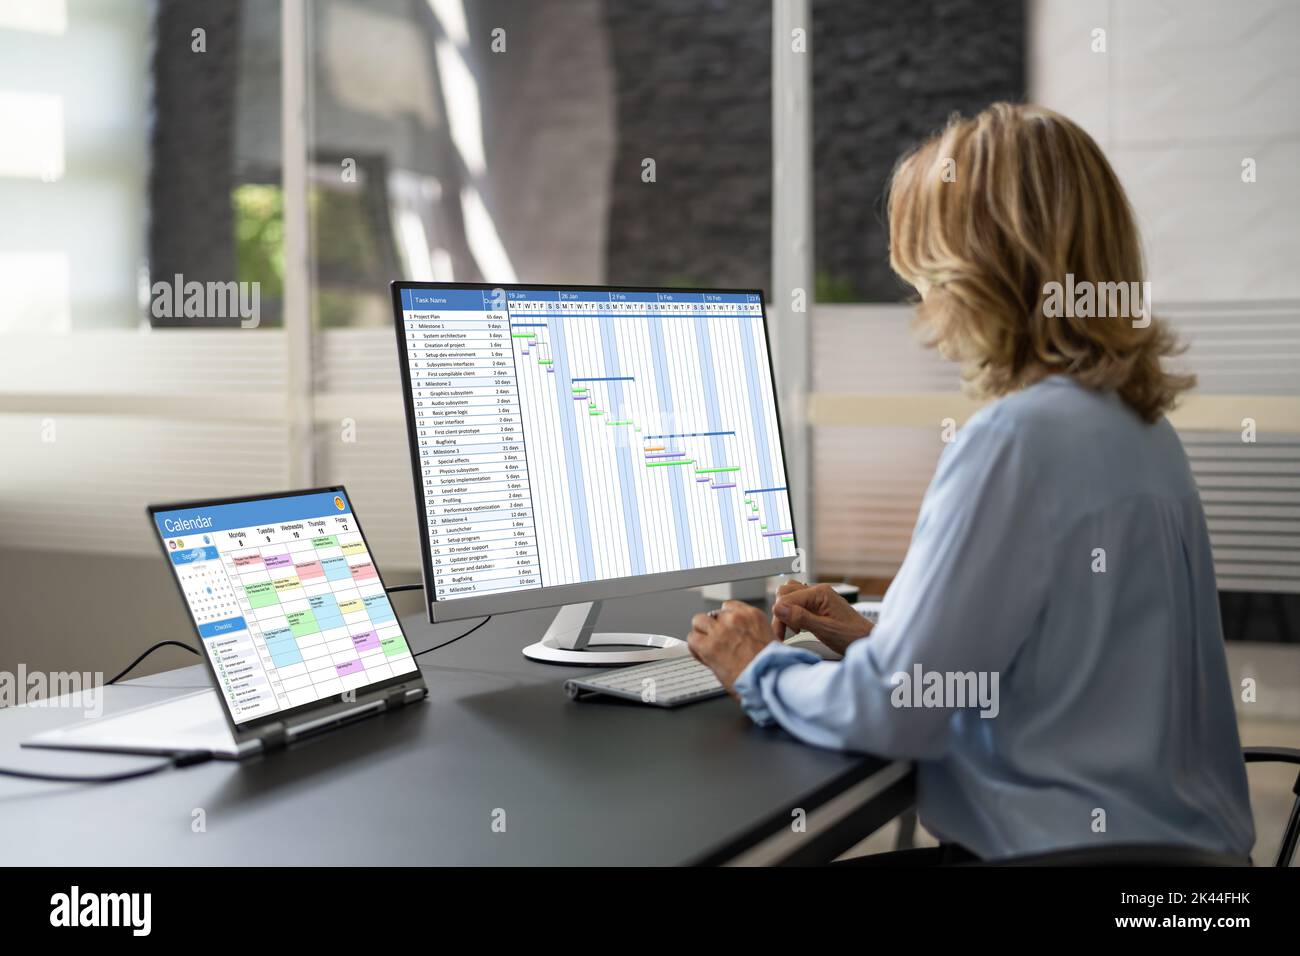 Employee Working On Calendar Schedule And Staff Time Sheet Stock Photo